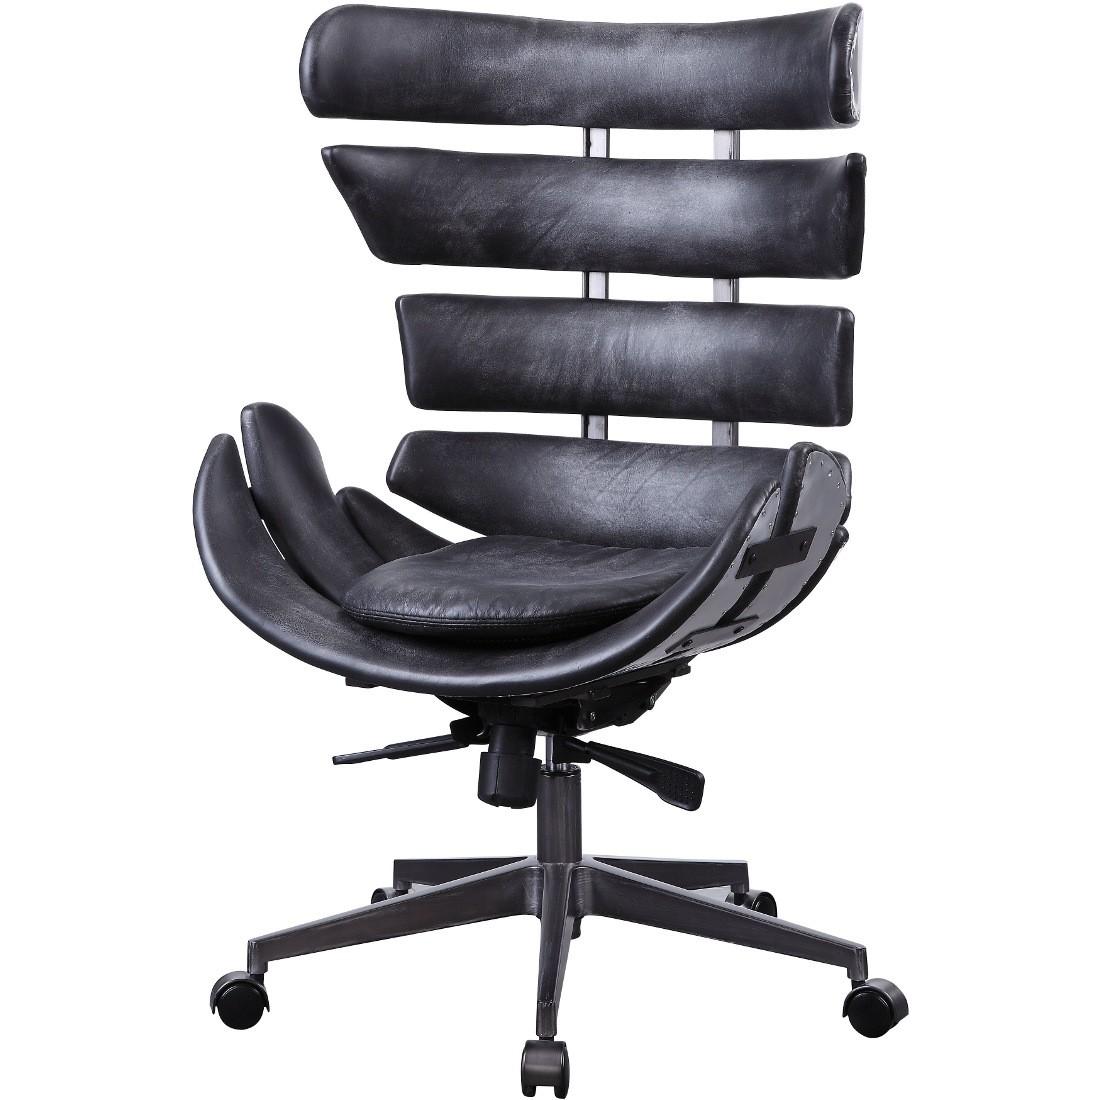 Contemporary, Transitional Executive Chair Megan Megan 92552 in Chrome, Black Genuine Leather